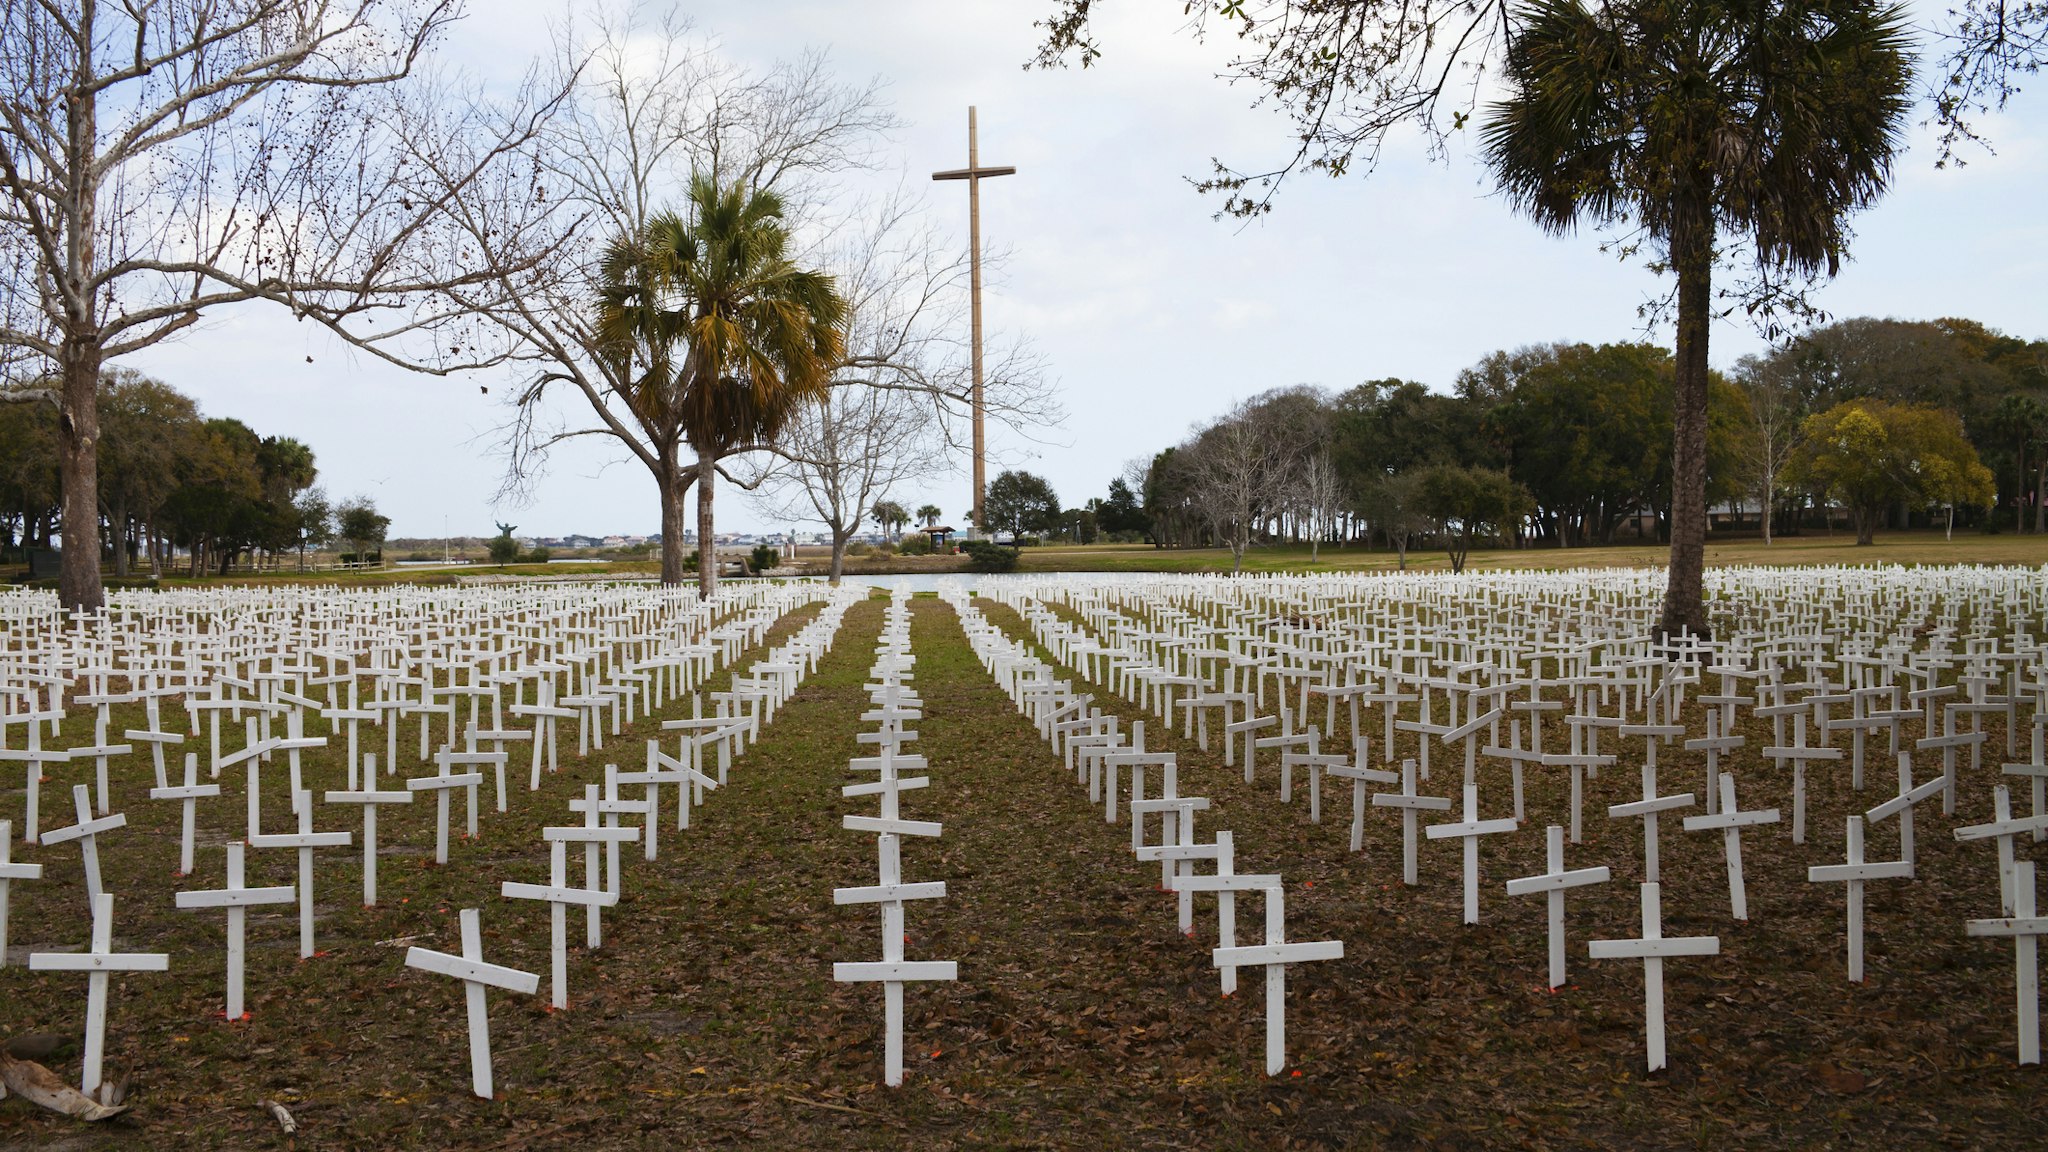 Thousands of white crosses at the Cemetery of the Innocent, in St Augustine, Florida represent the 4000 babies who are aborted daily in the United States. In the background stands the Great Cross, marking where Christianity first came to America.